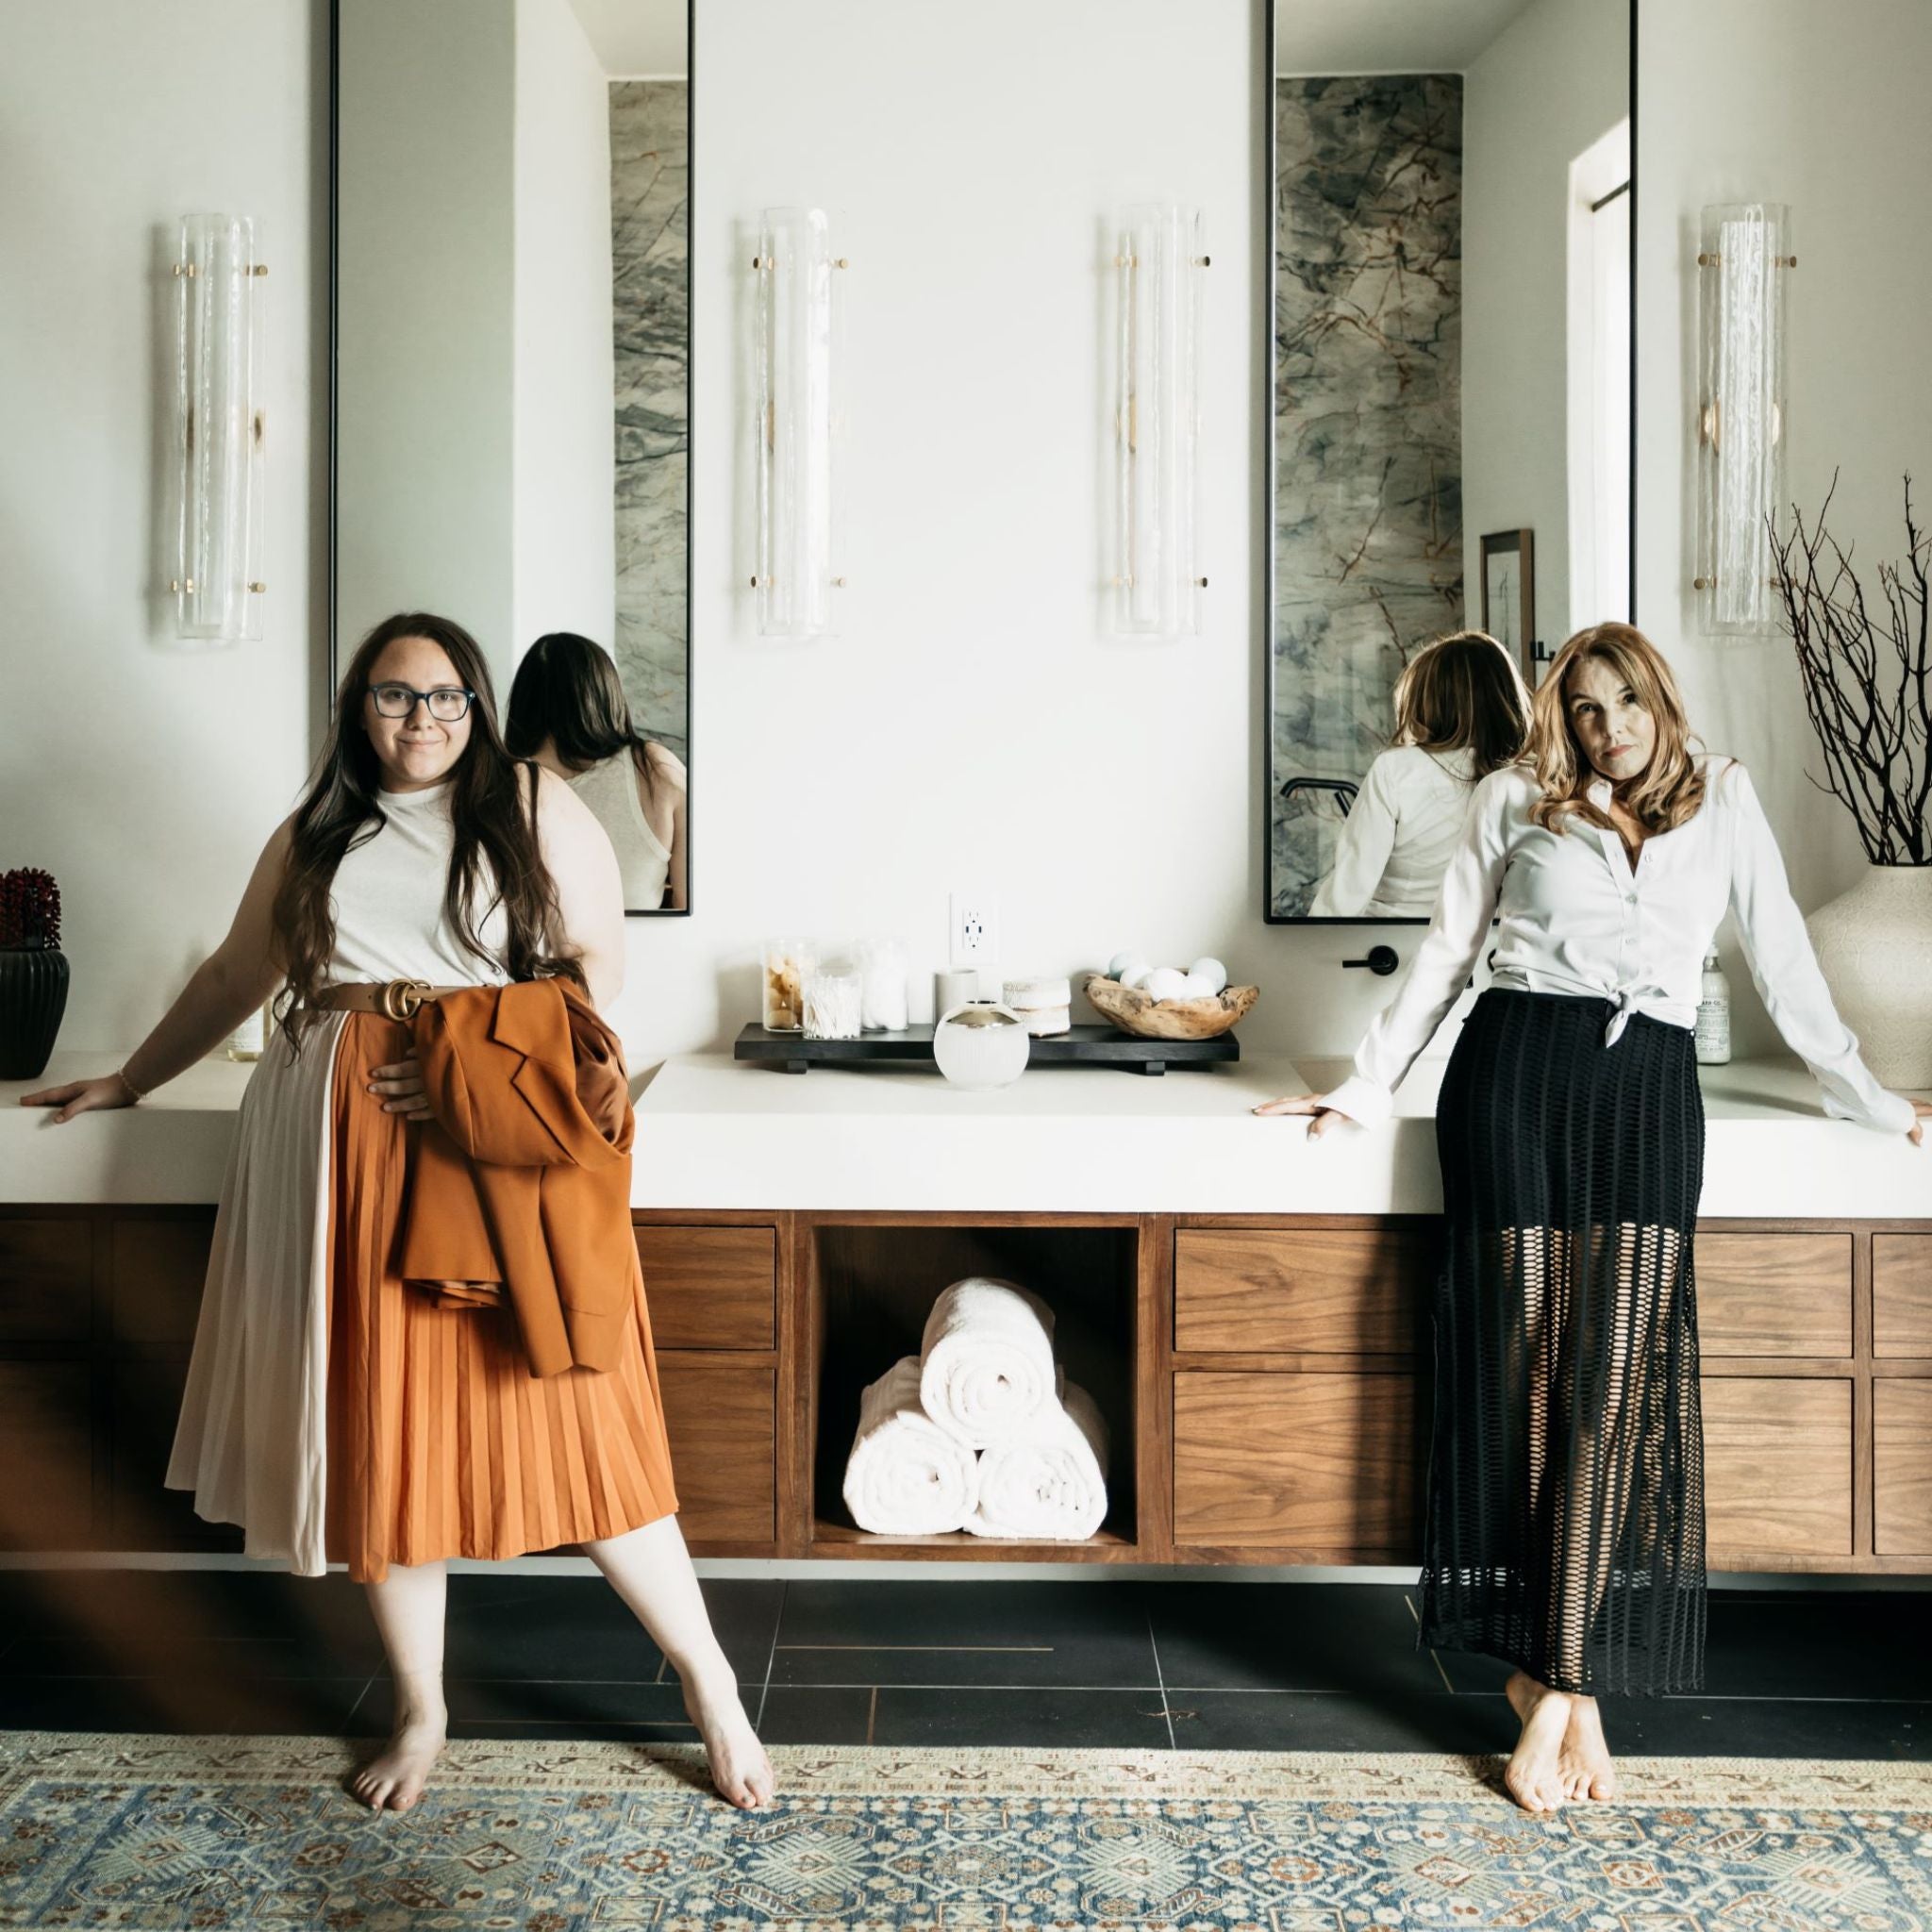 Learn more about this SLC mother and daughter team -  Simply Elevated Home Furnishing Salt Lake City  